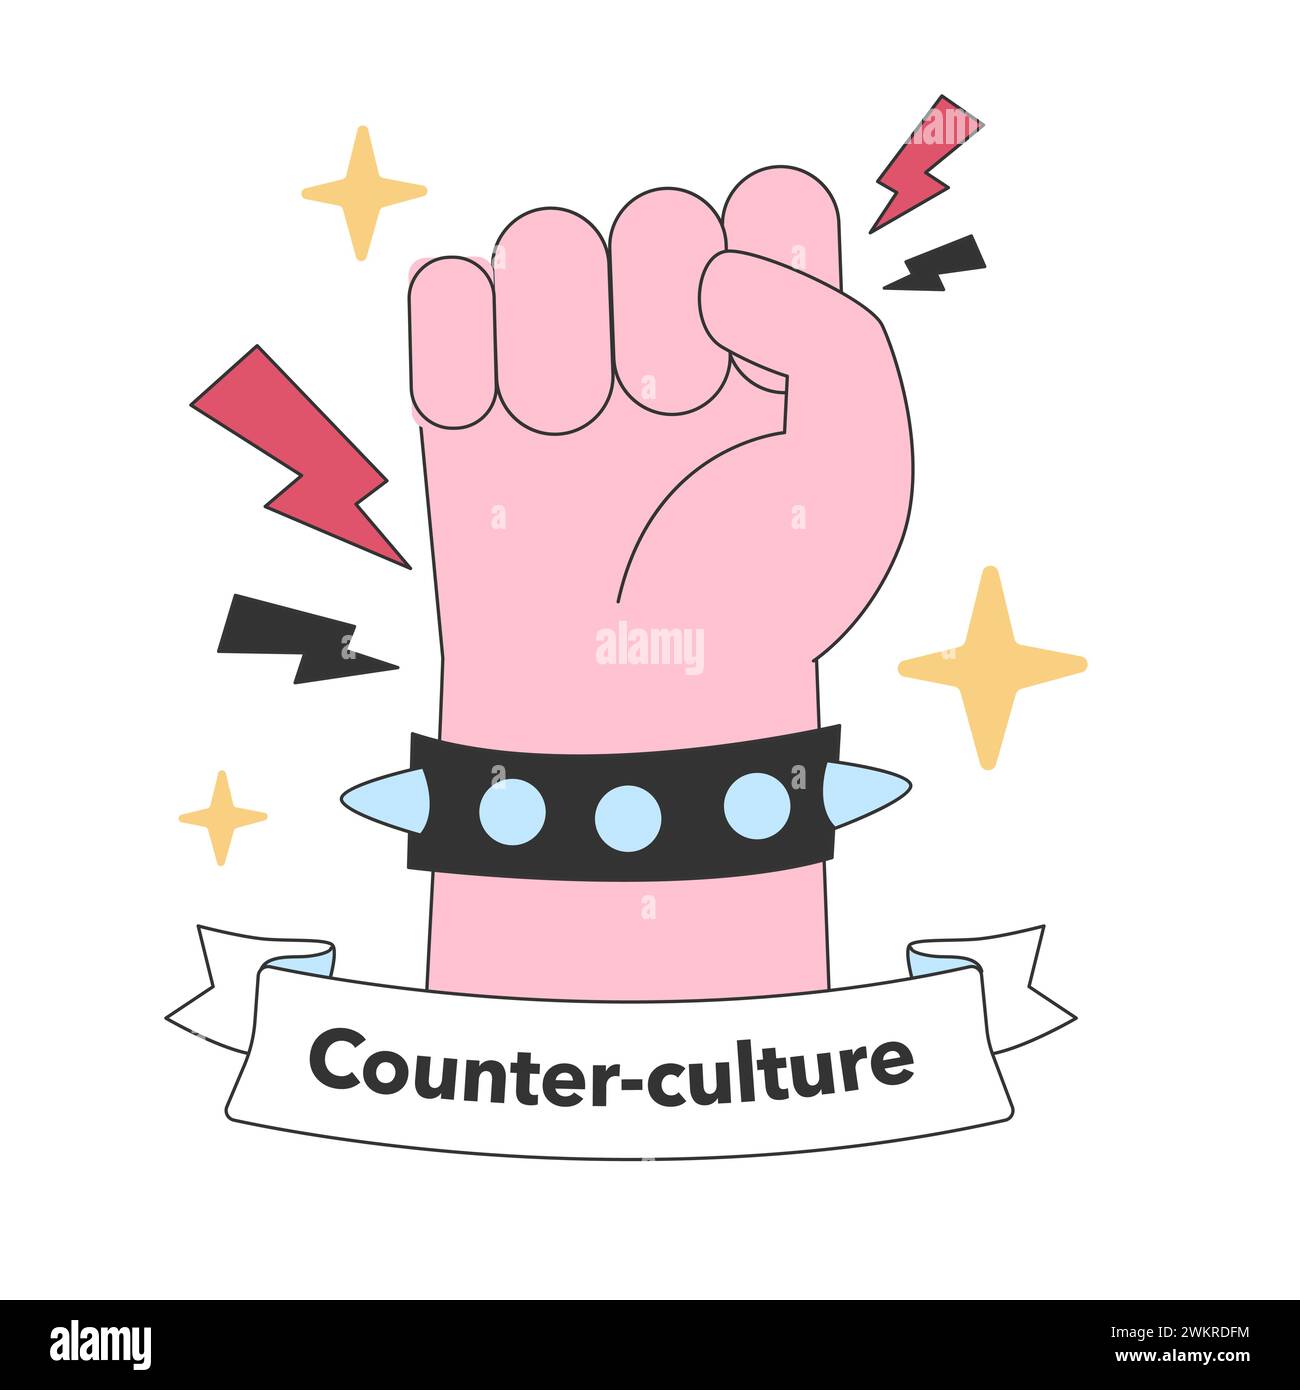 Iconic raised fist symbolizing counter-culture's strength and defiance, set against a backdrop of electric energy and resistance. Flat vector illustration Stock Vector